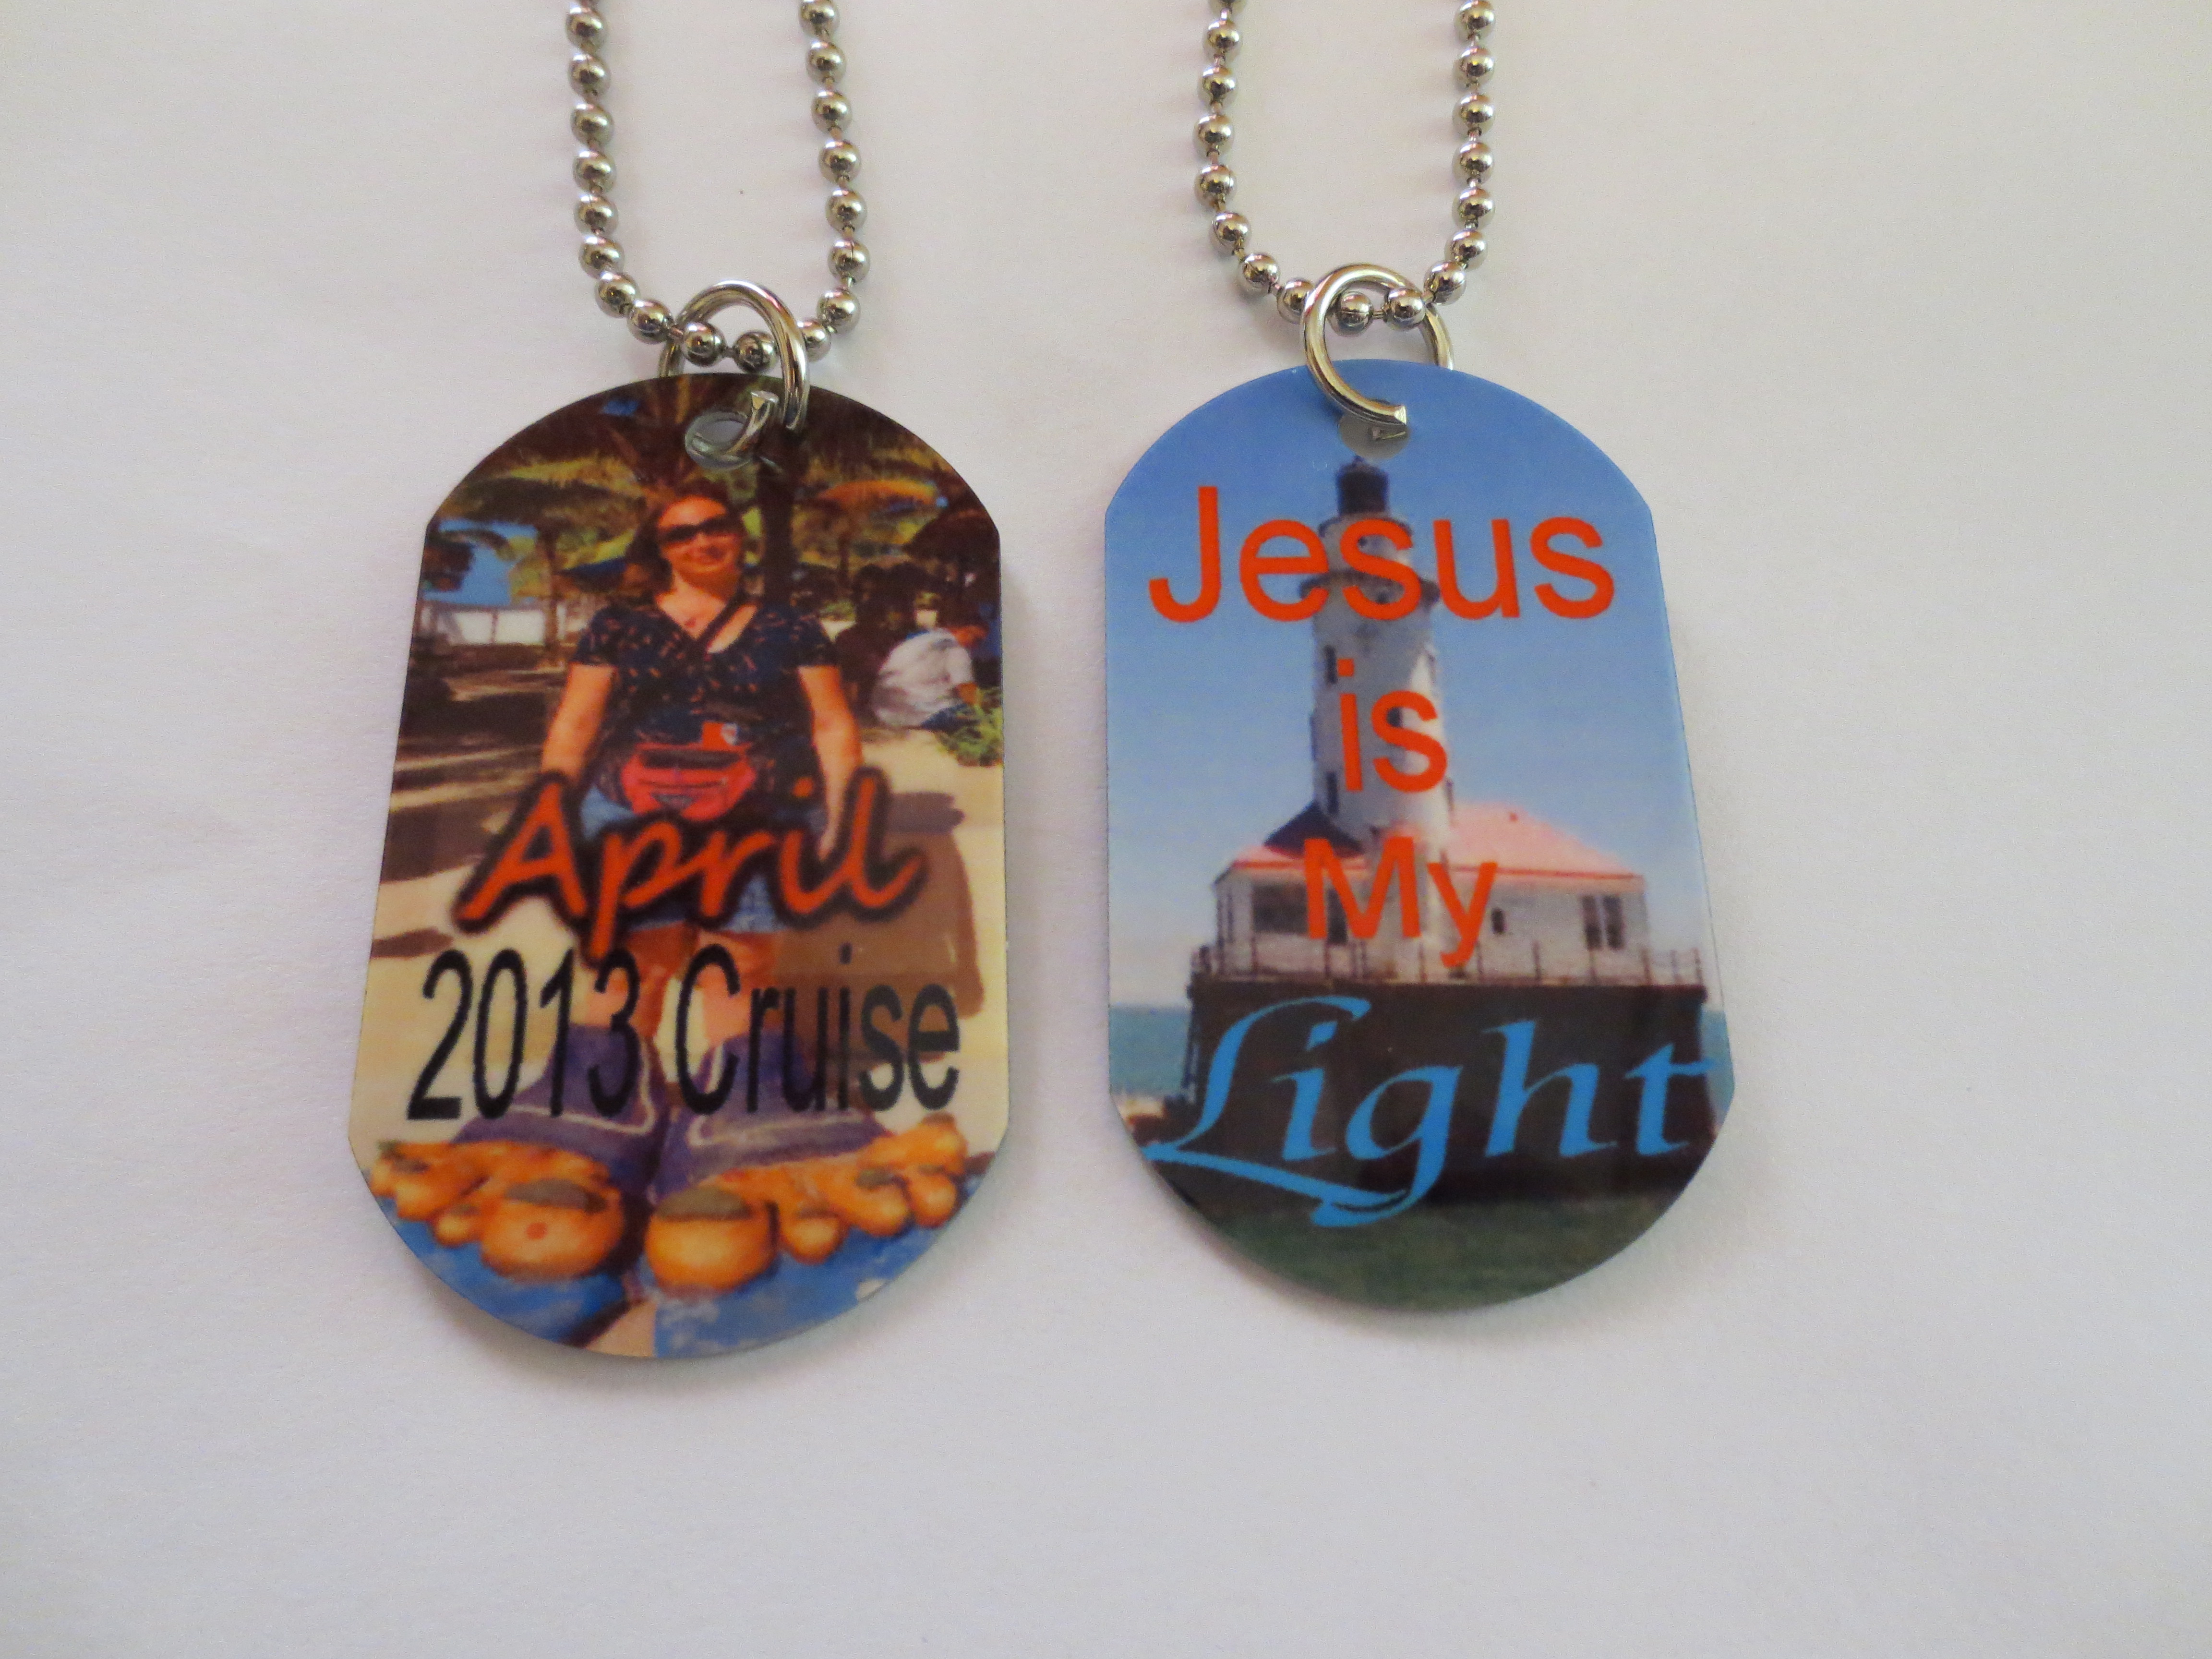 April's Dog Tag made with sublimation printing